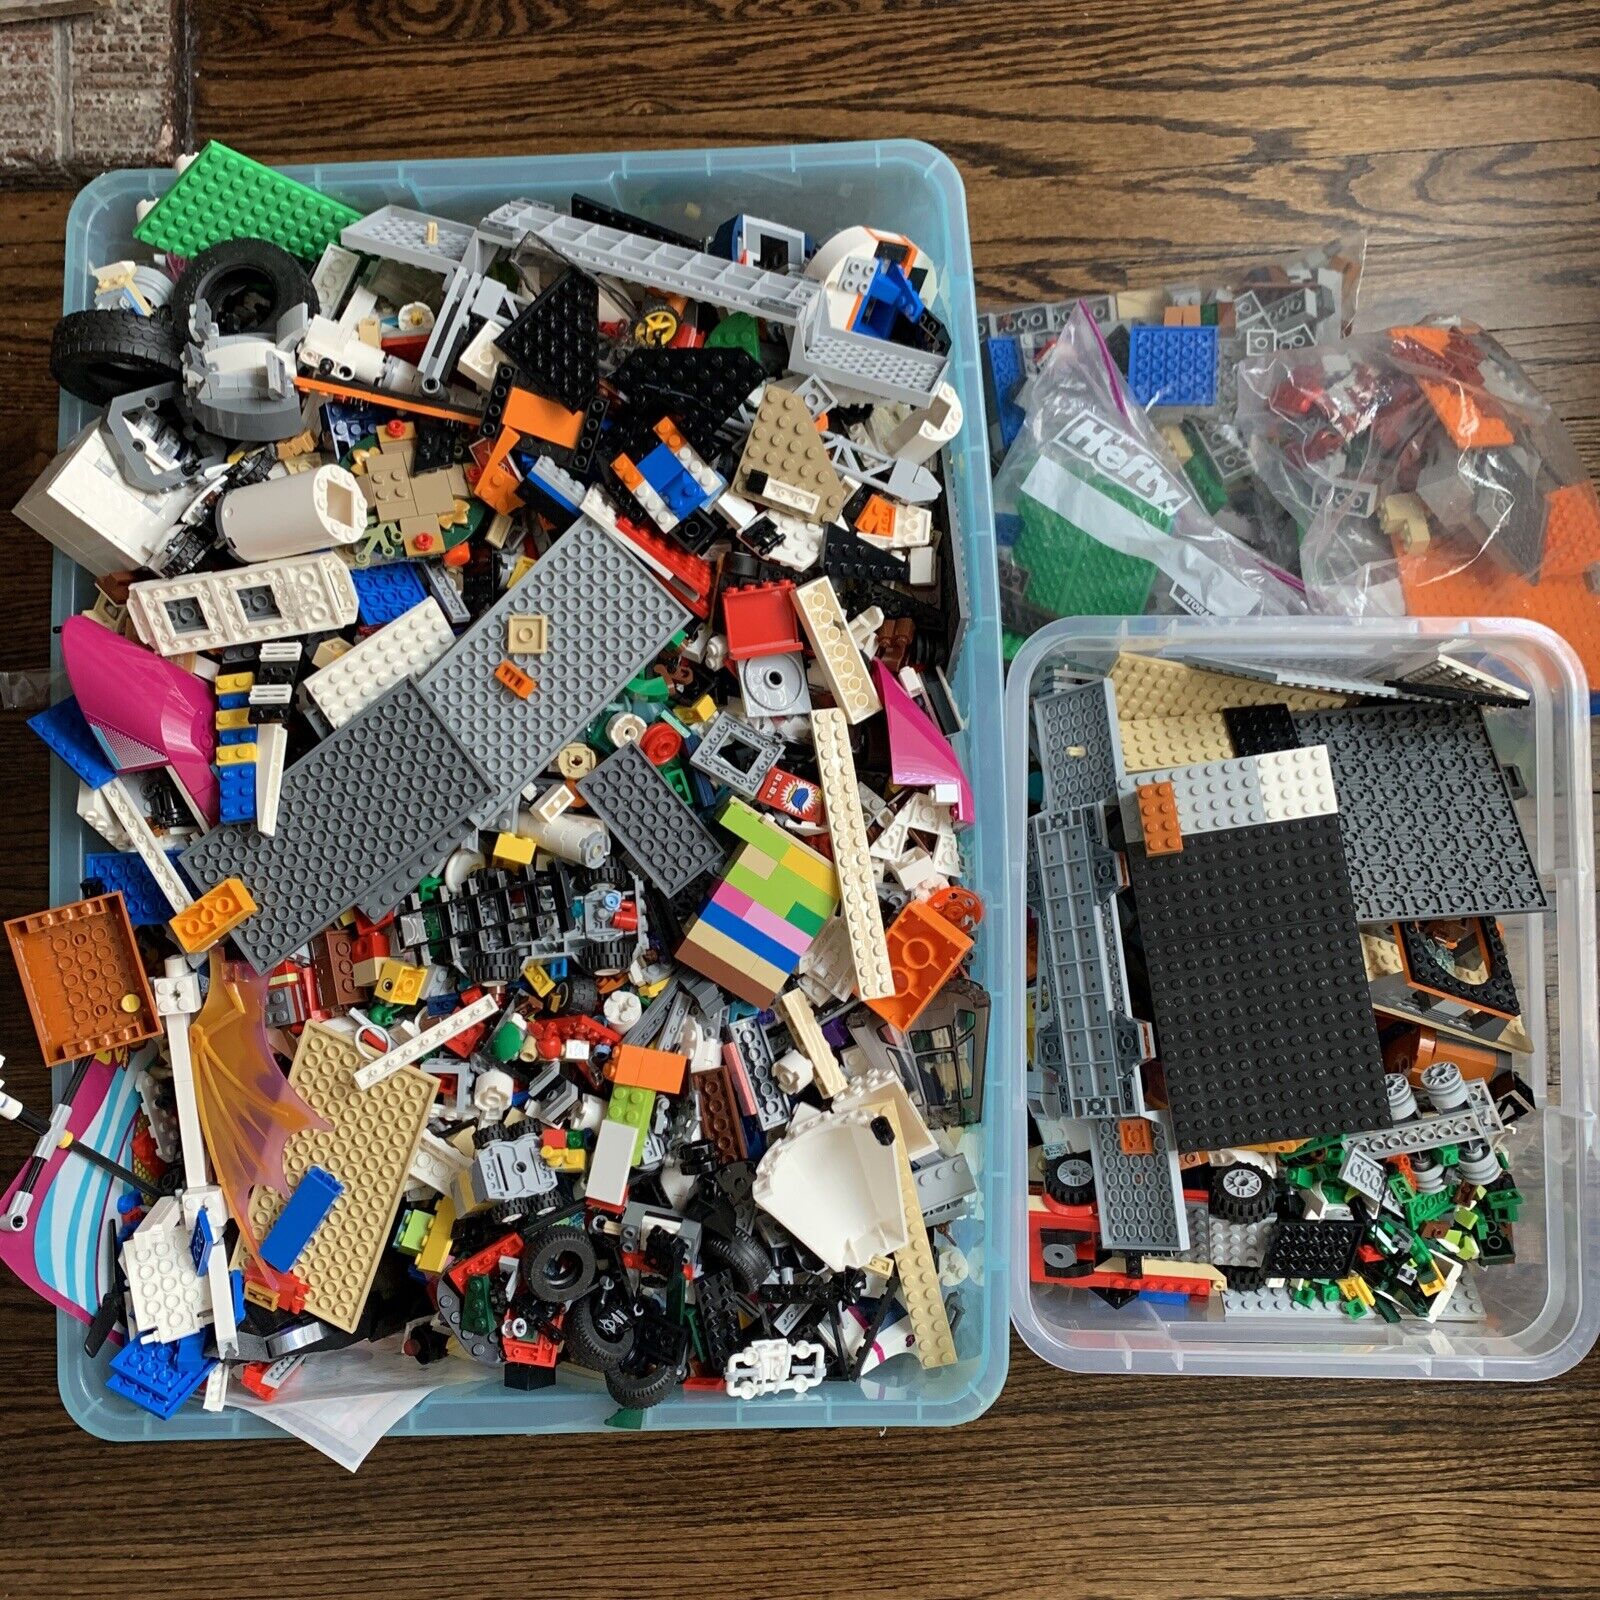 1lbs Each Order - Lego by the Pound Misc Pieces, Volume Discount - By Weight